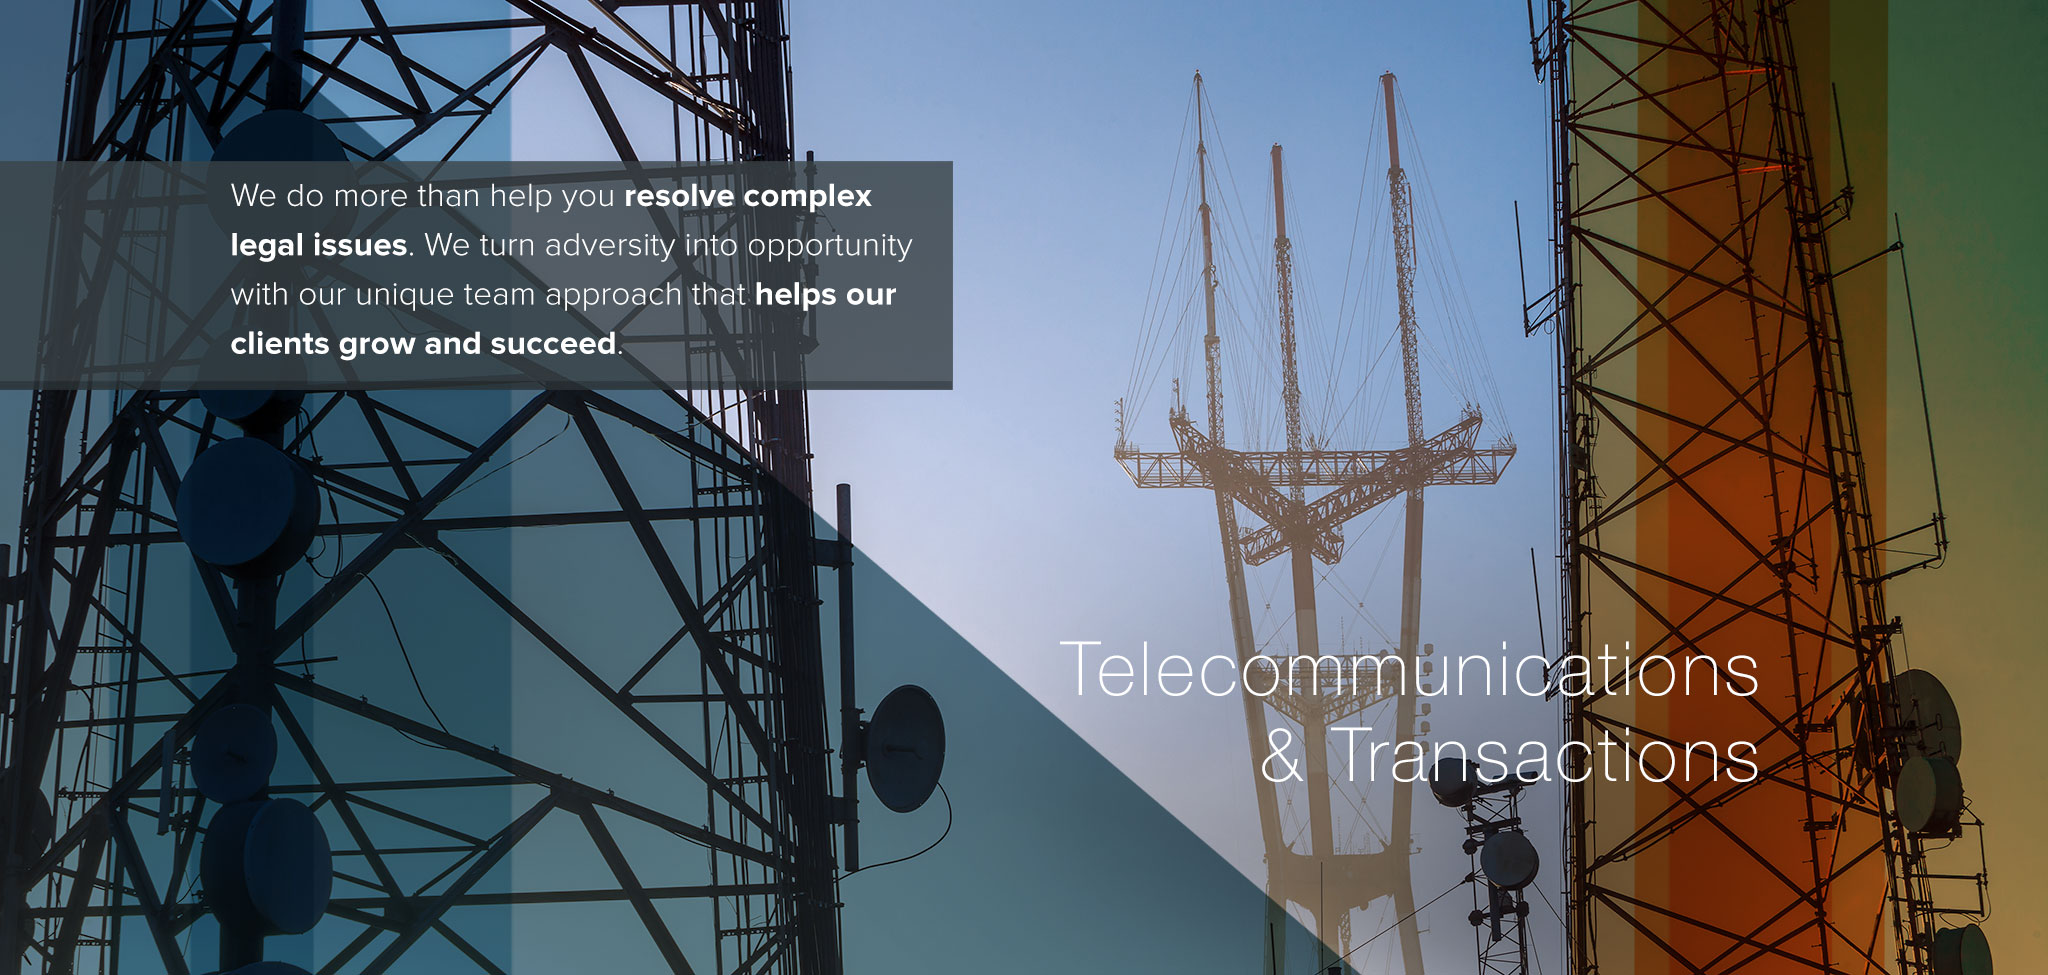 Telecommunications & Transactions. We do more than help your resolve complex legal issues.